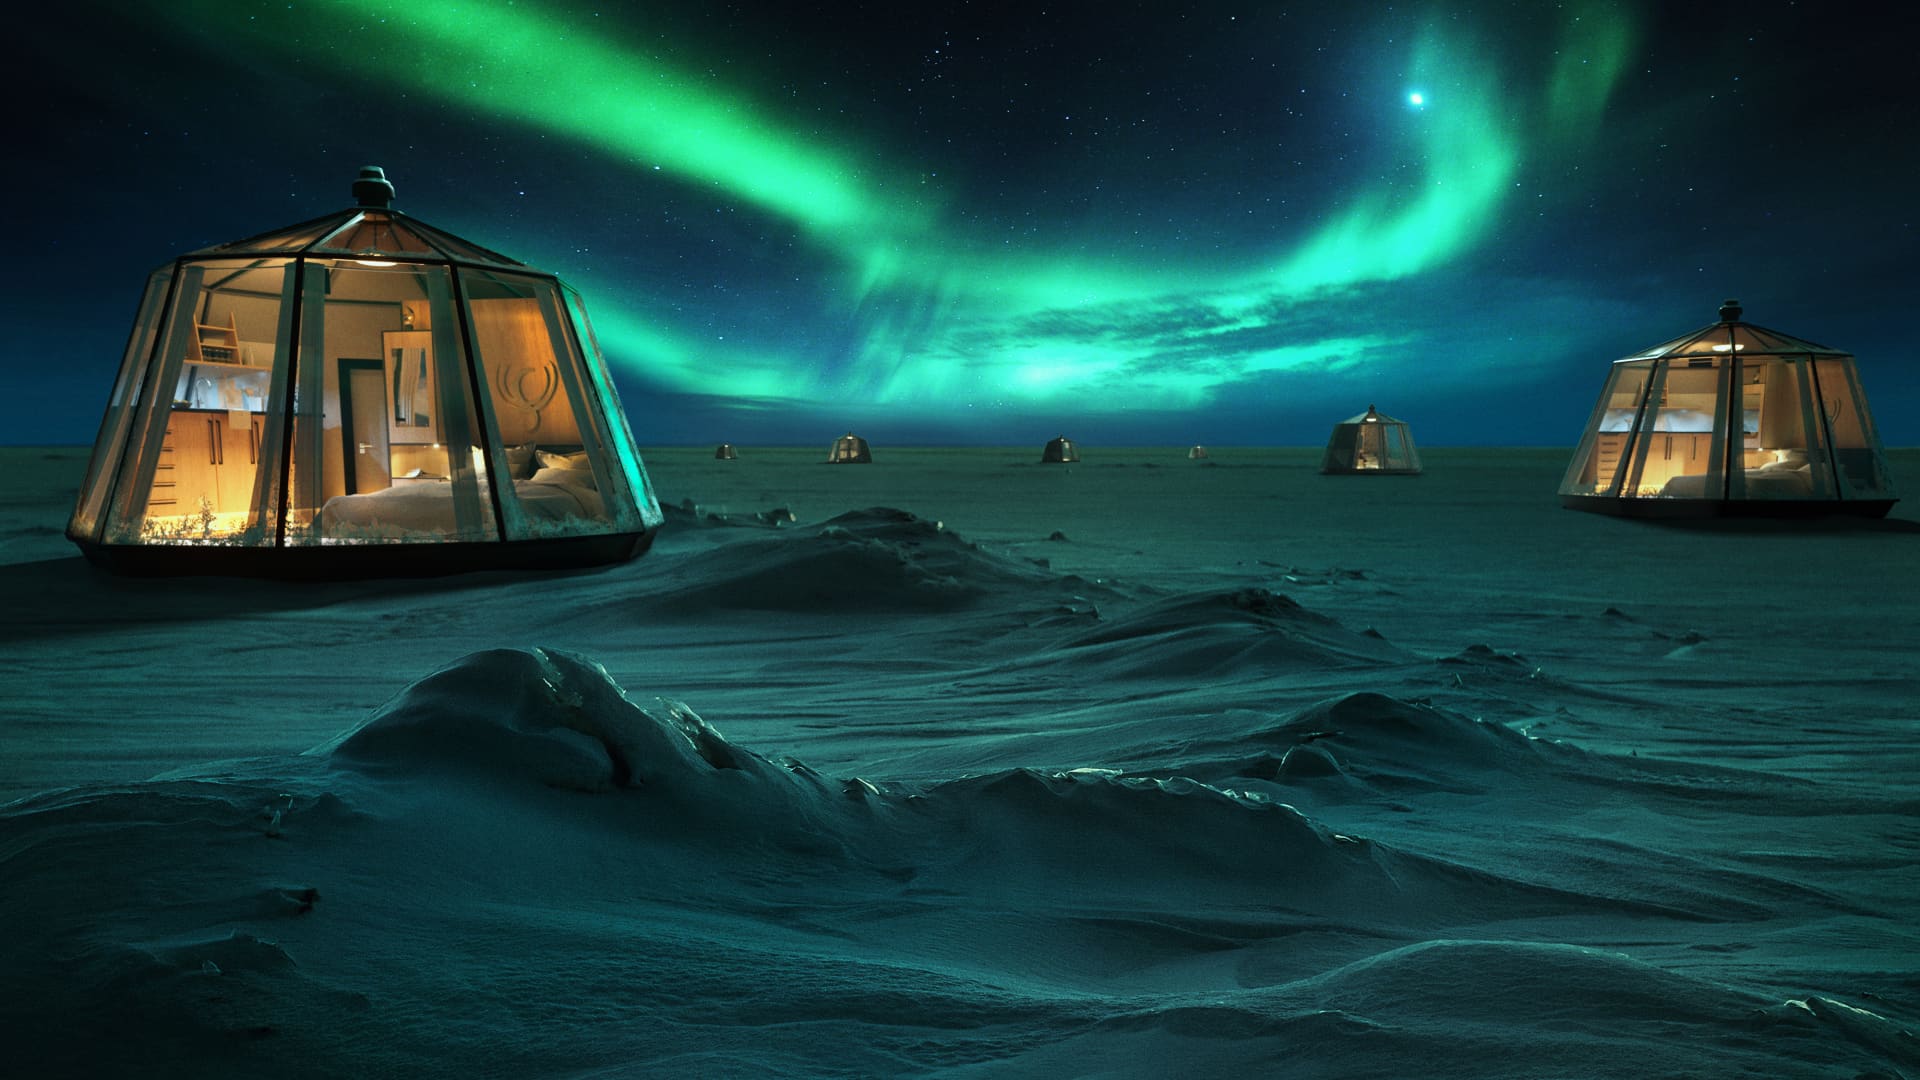 A new pop-up hotel in the North Pole will charge guests $100,000 to stay — take a look inside